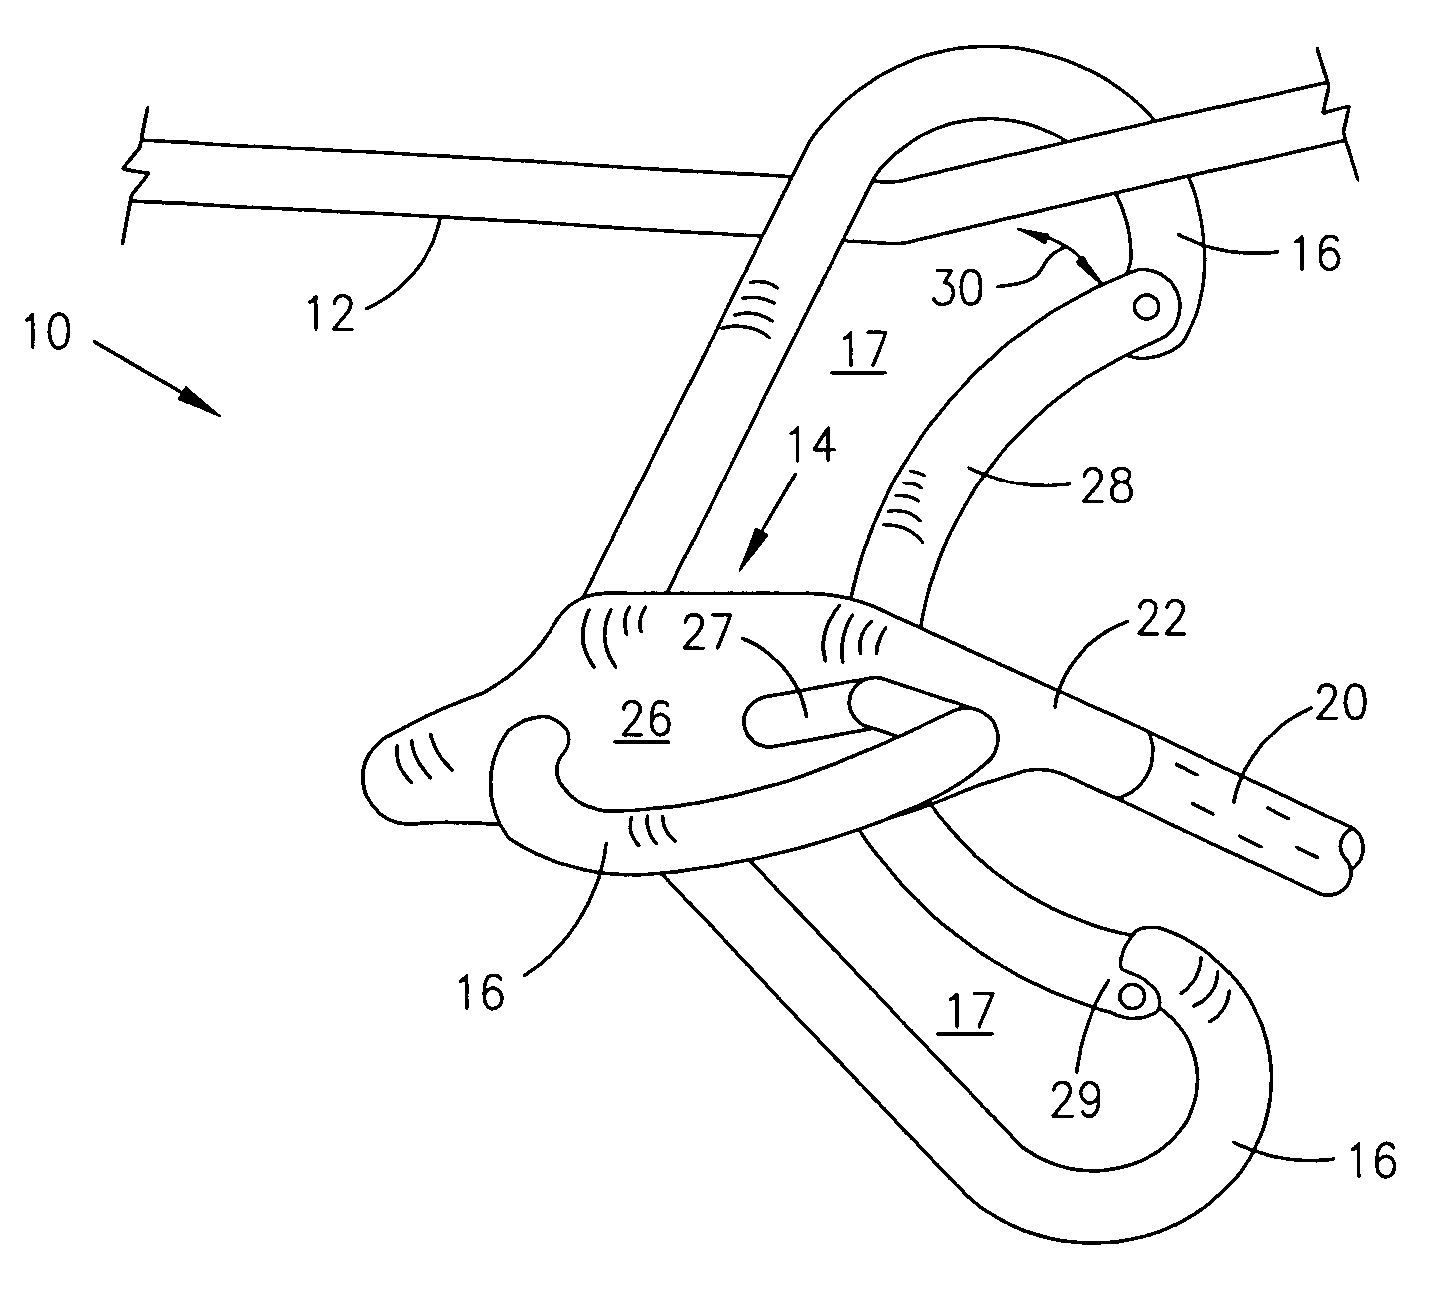 Line capture system and method